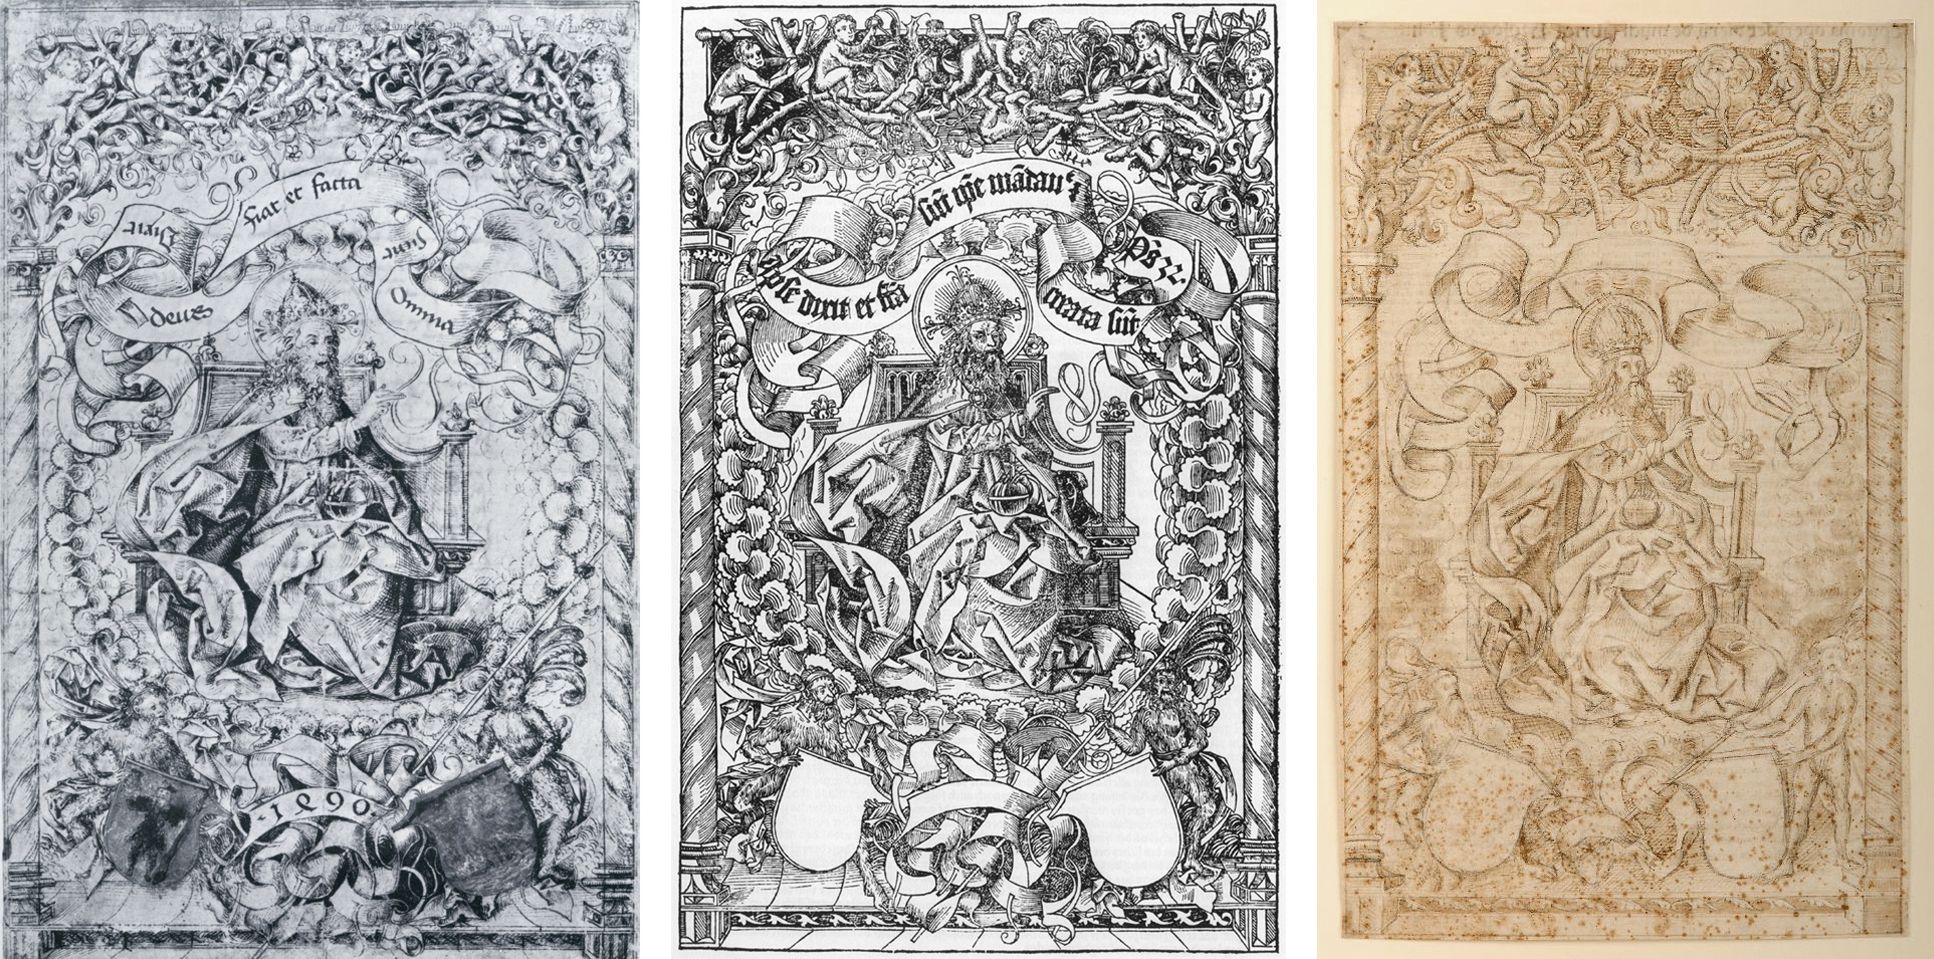 Cover of Schedel´s World Chronicle A: Original drawing from the workshop of Michael Wolgemut. b: Cover of Schedel´s World Chronicle, 1493, copy of the original drawing in London, 1490s?